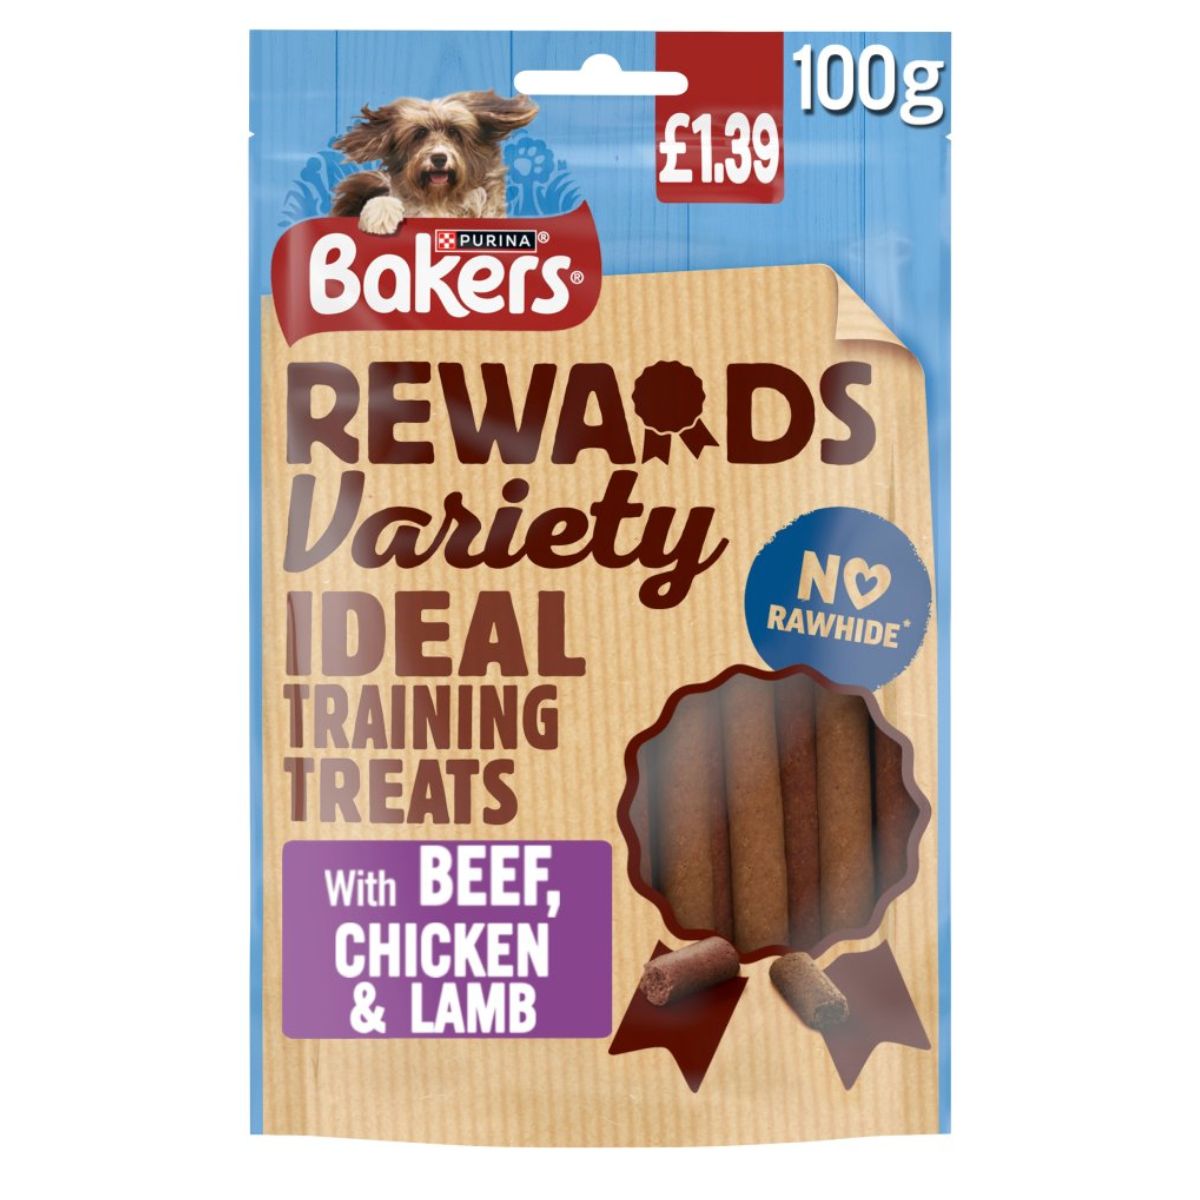 Baker's - Rewards Variety with Beef Chicken & Lamb - 100g are ideal training treats.